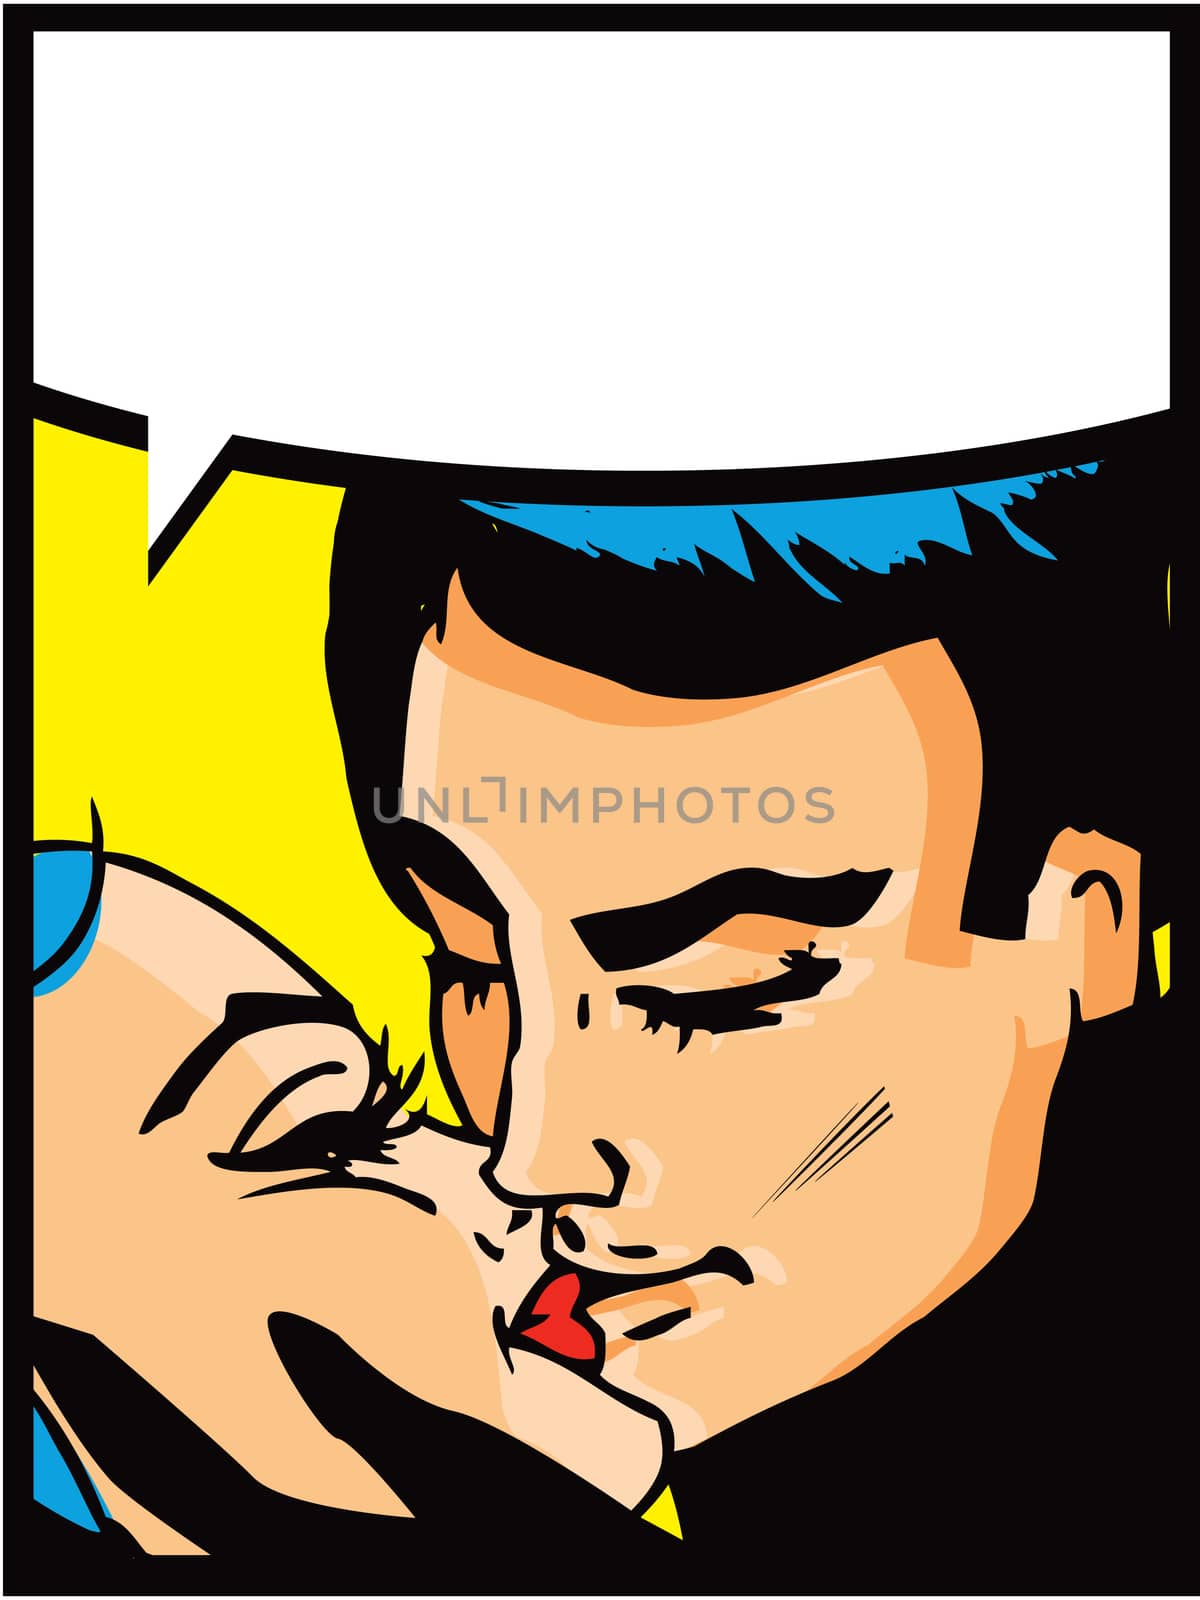 Lovers: Kissing couple man and woman in pop art comic style